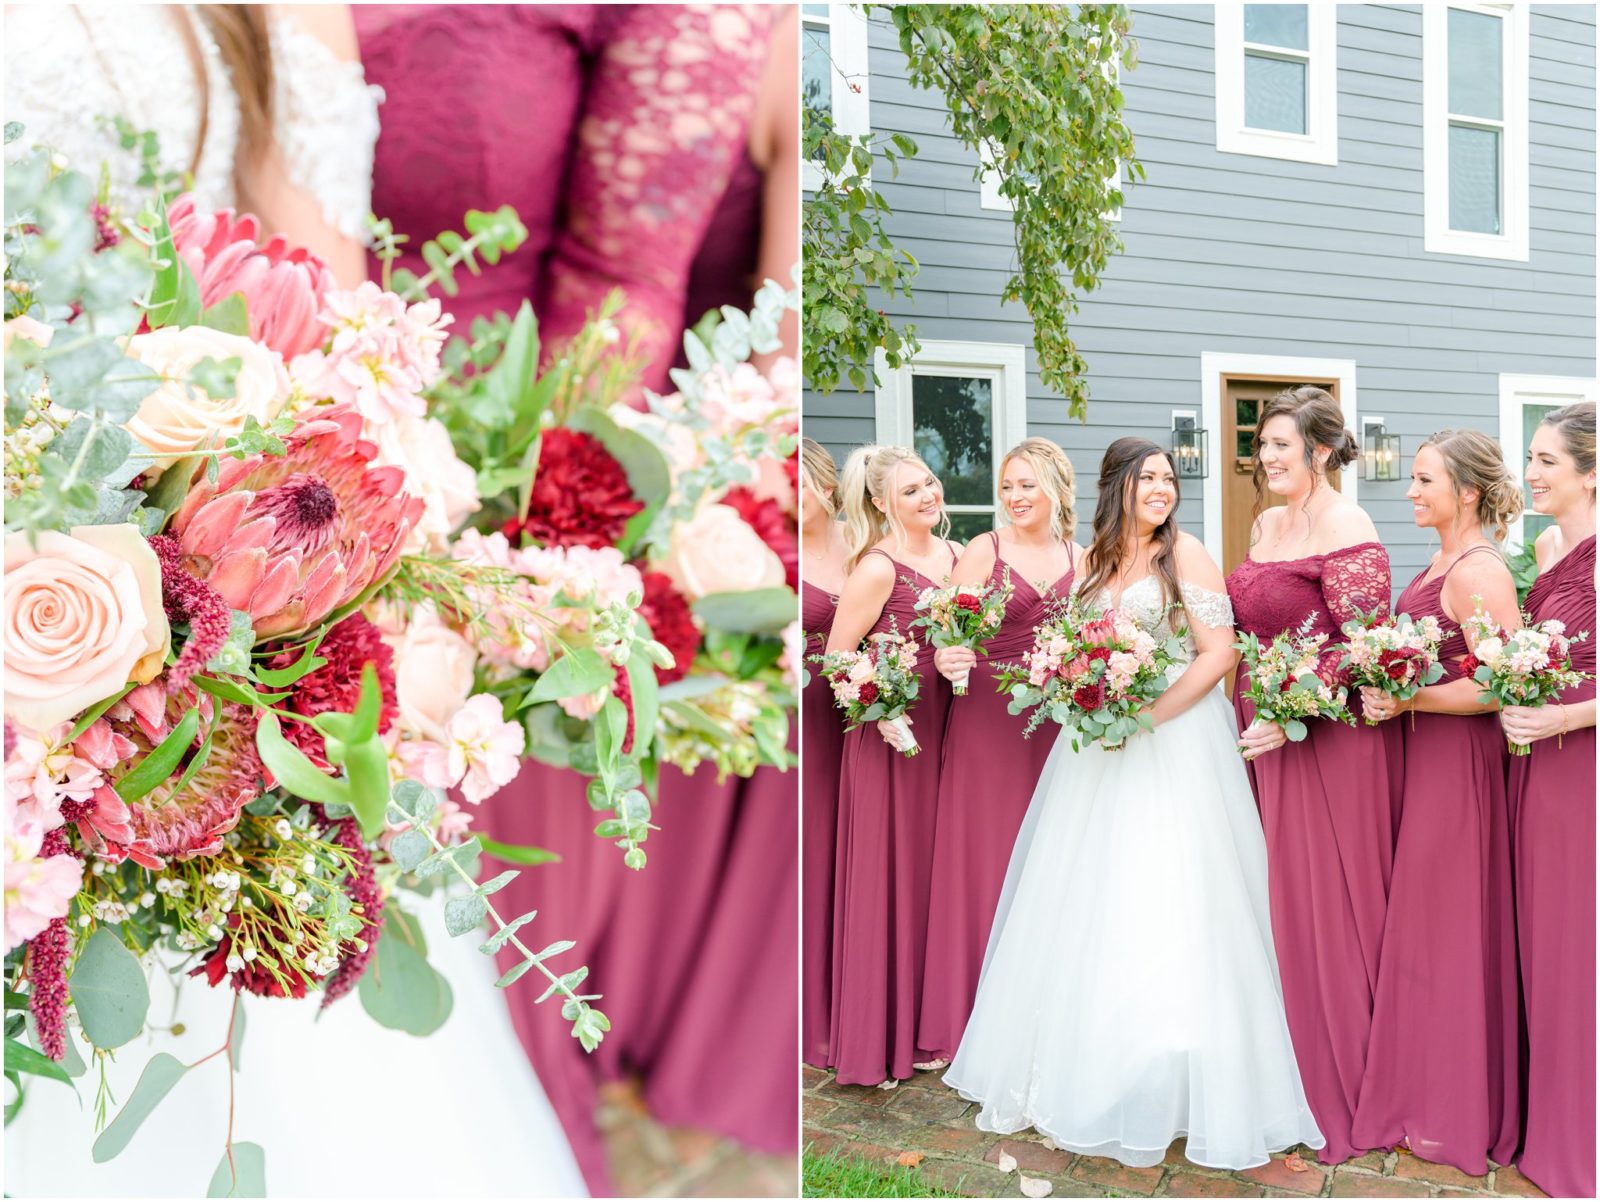 Bride and bridesmaids laughing together Mustard Seed Gardens wedding